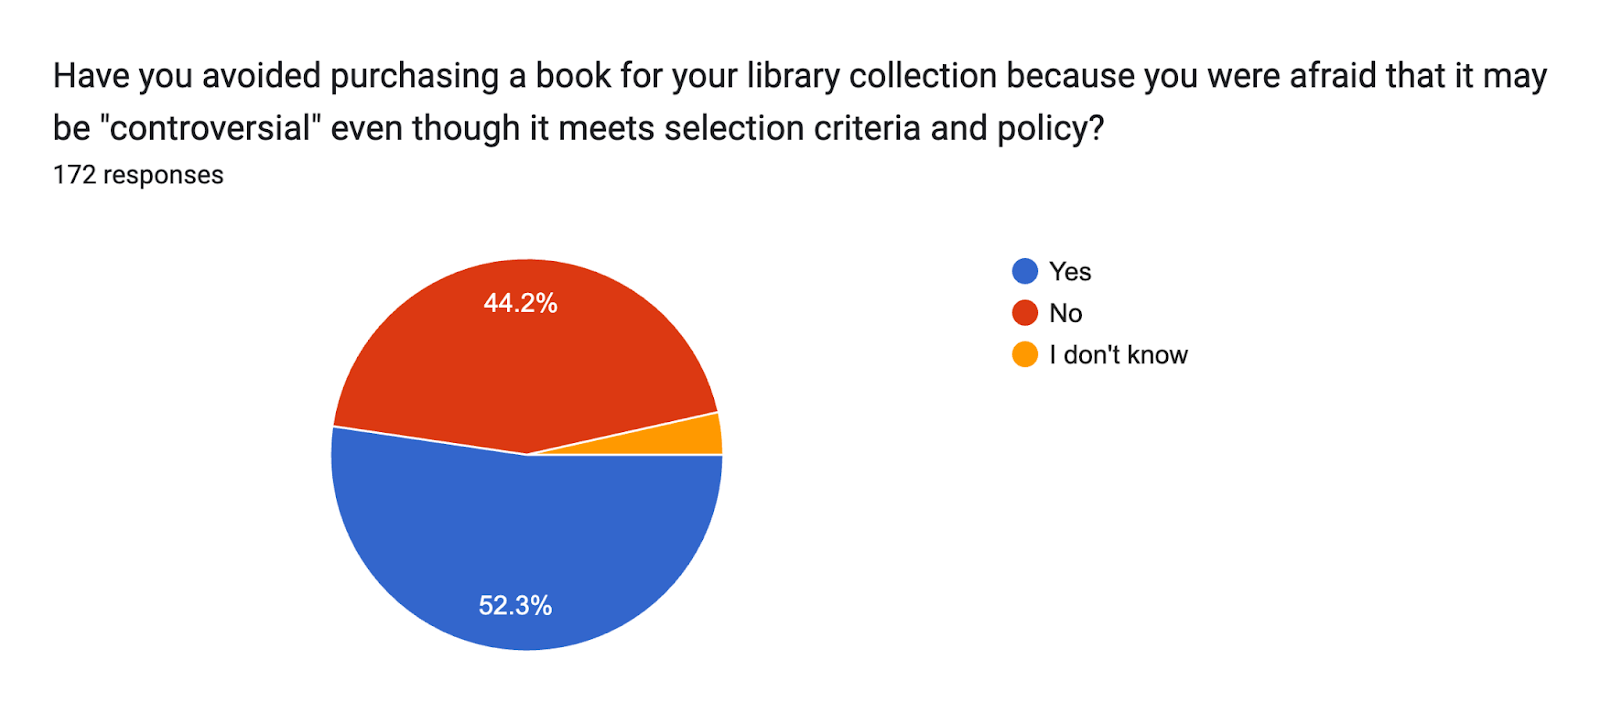 Forms response chart. Question title: Have you avoided purchasing a book for your library collection because you were afraid that it may be "controversial" even though it meets selection criteria and policy?. Number of responses: 172 responses.